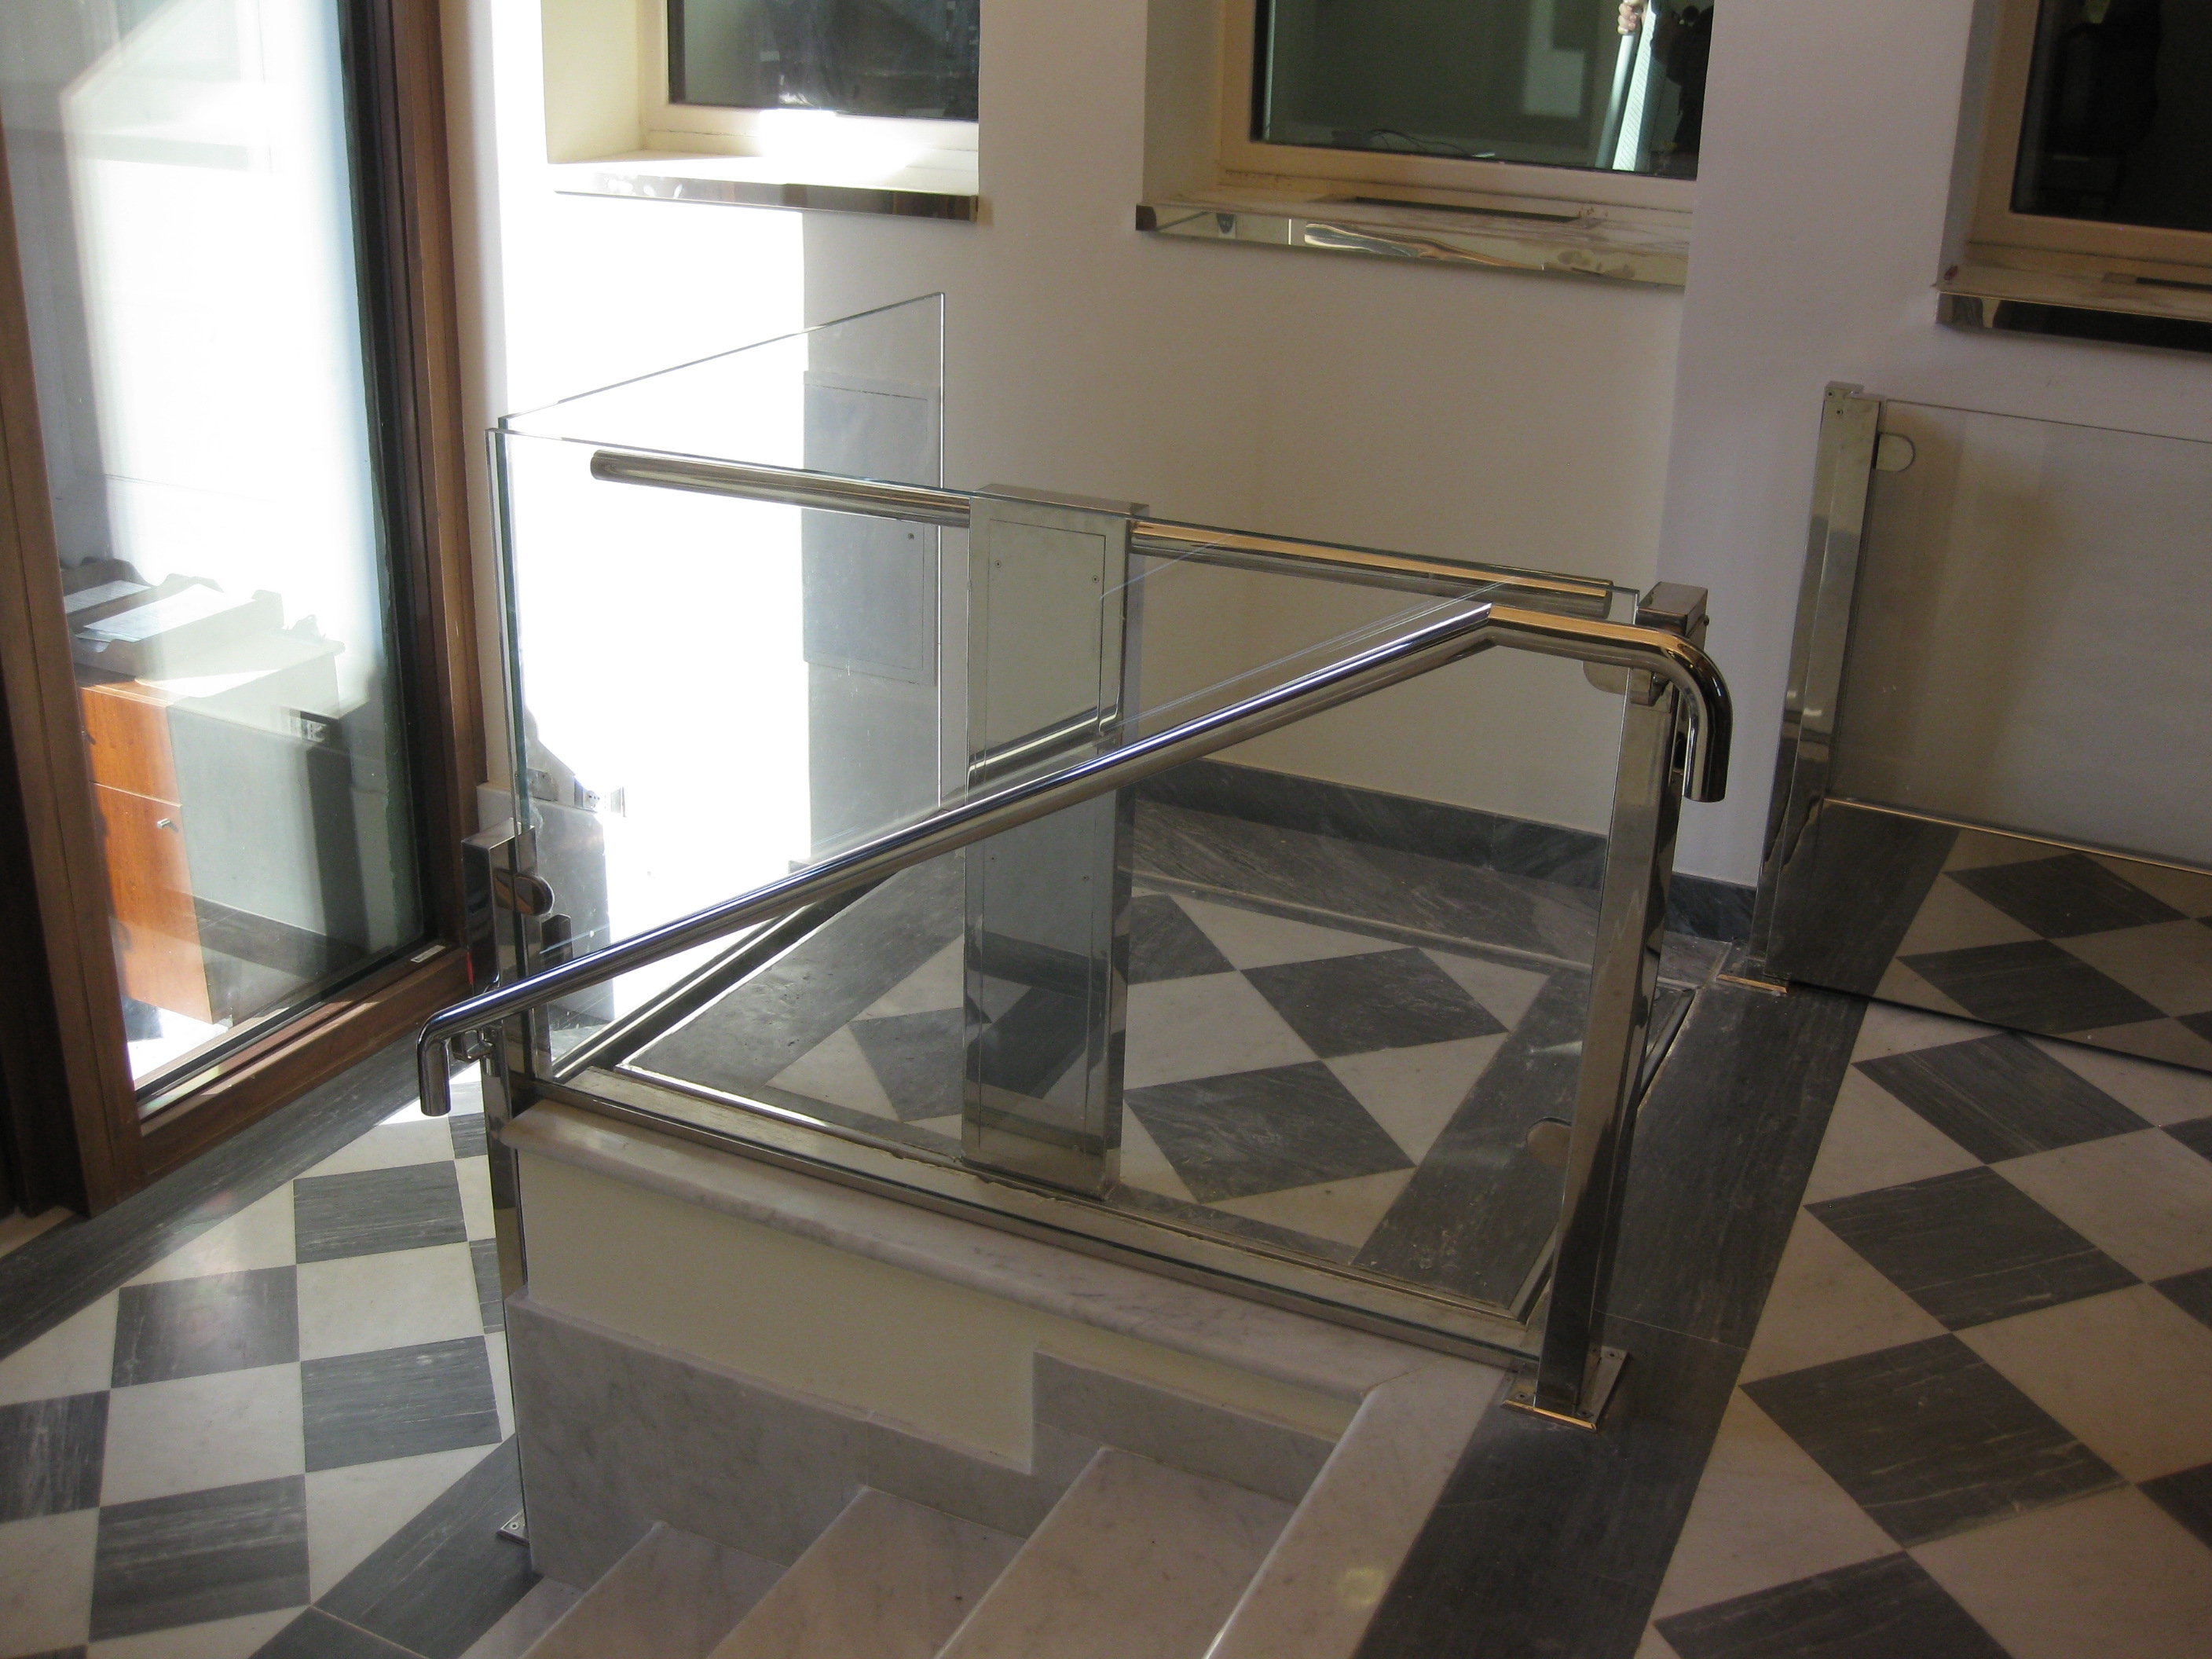 Accessible Route - Lift Main Lobby